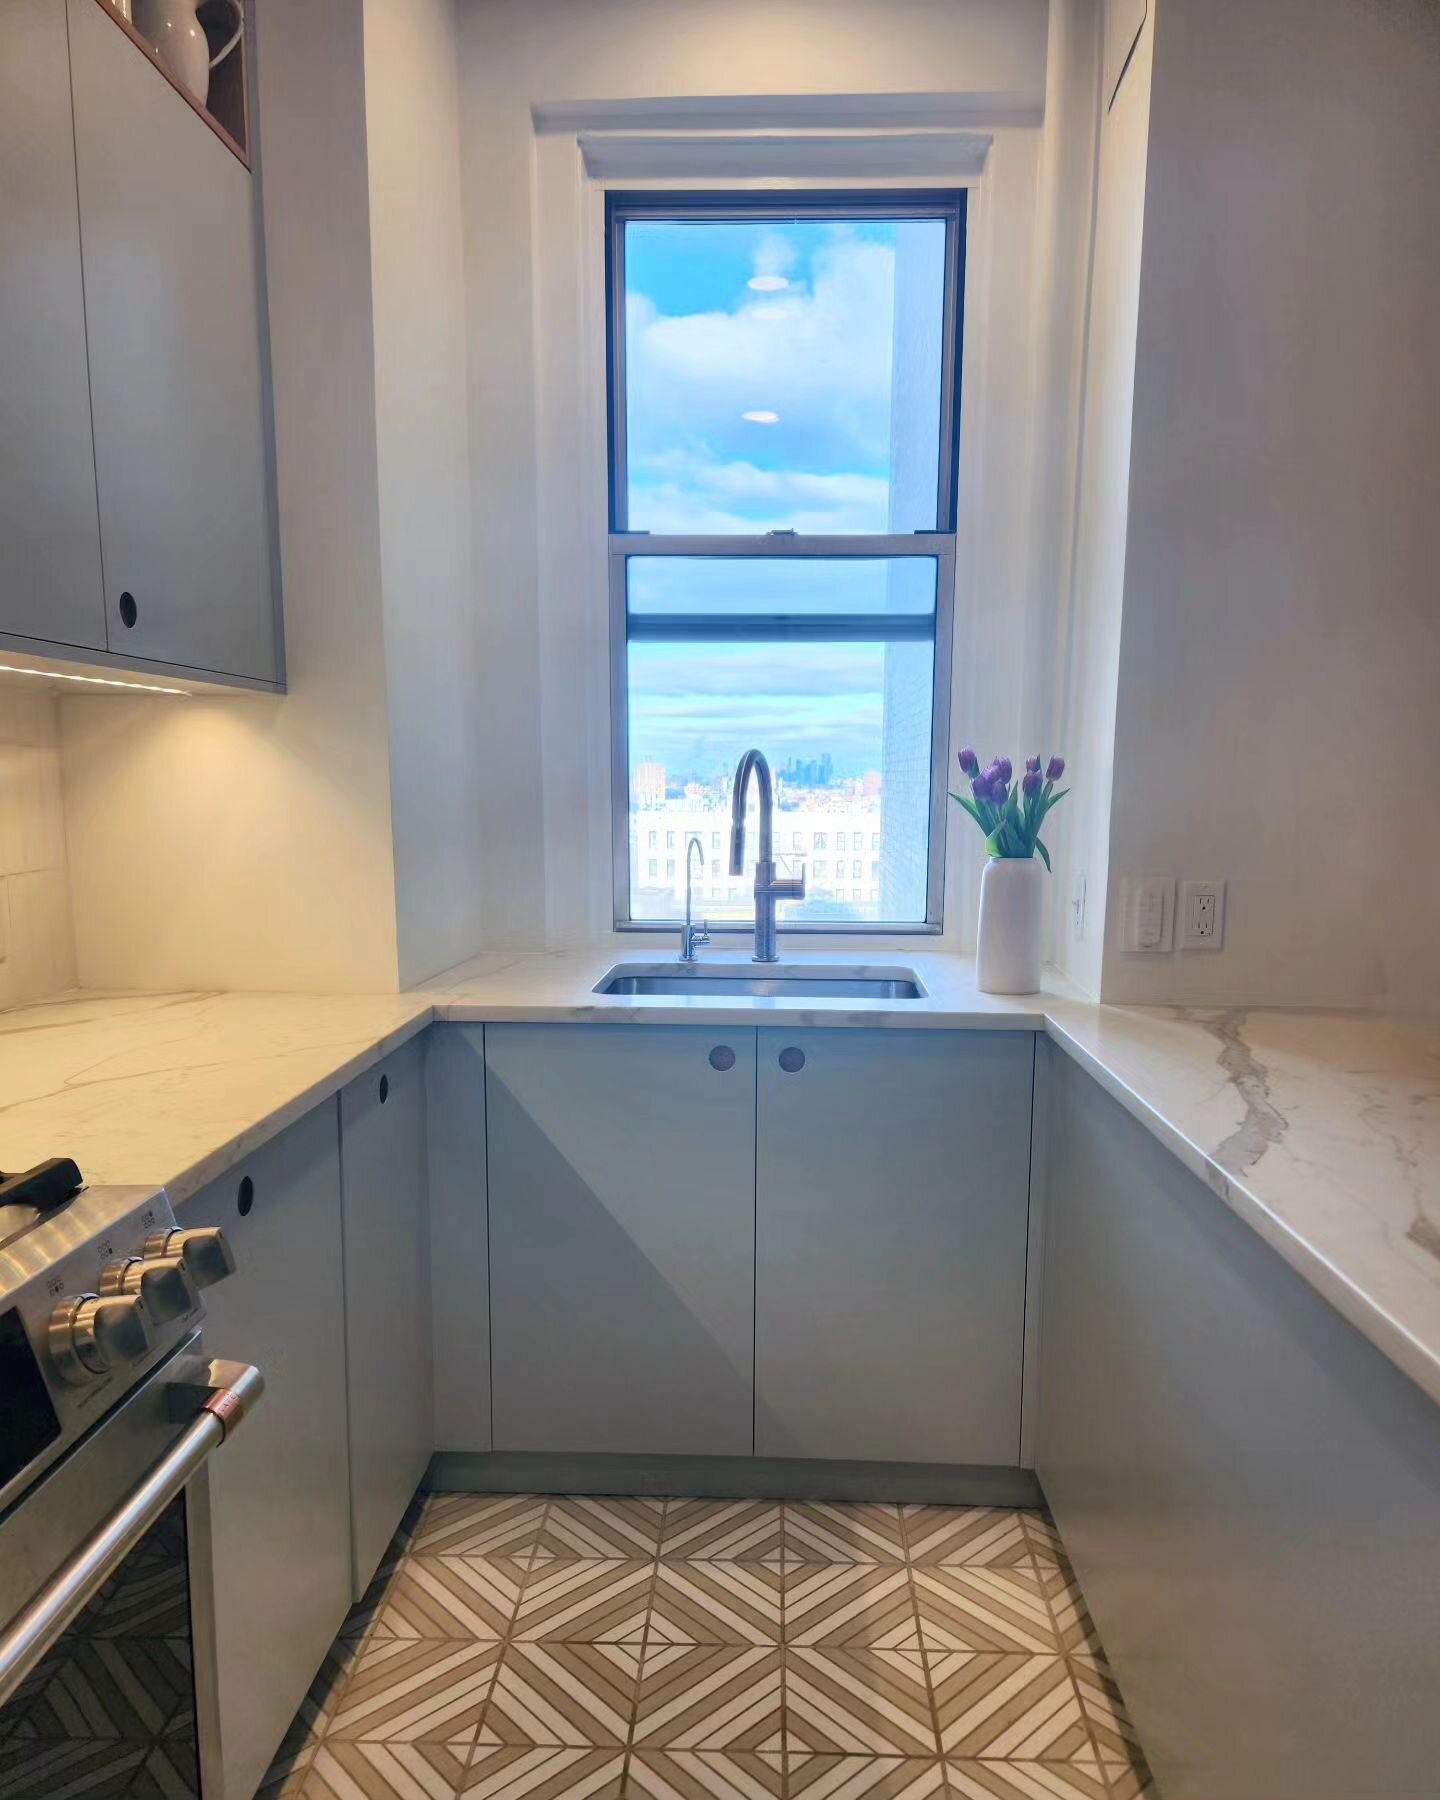 The sky was really cooperating on this shot ☀️ 
Brand new kitchen for our clients in Prospect Heights!
.
..
...
#kitchenreno #kitchendesign #kitcheninspo #interiordesign #interiorinspo #customcabinets #handmadetile #grandarmyplaza #prospectheights #p